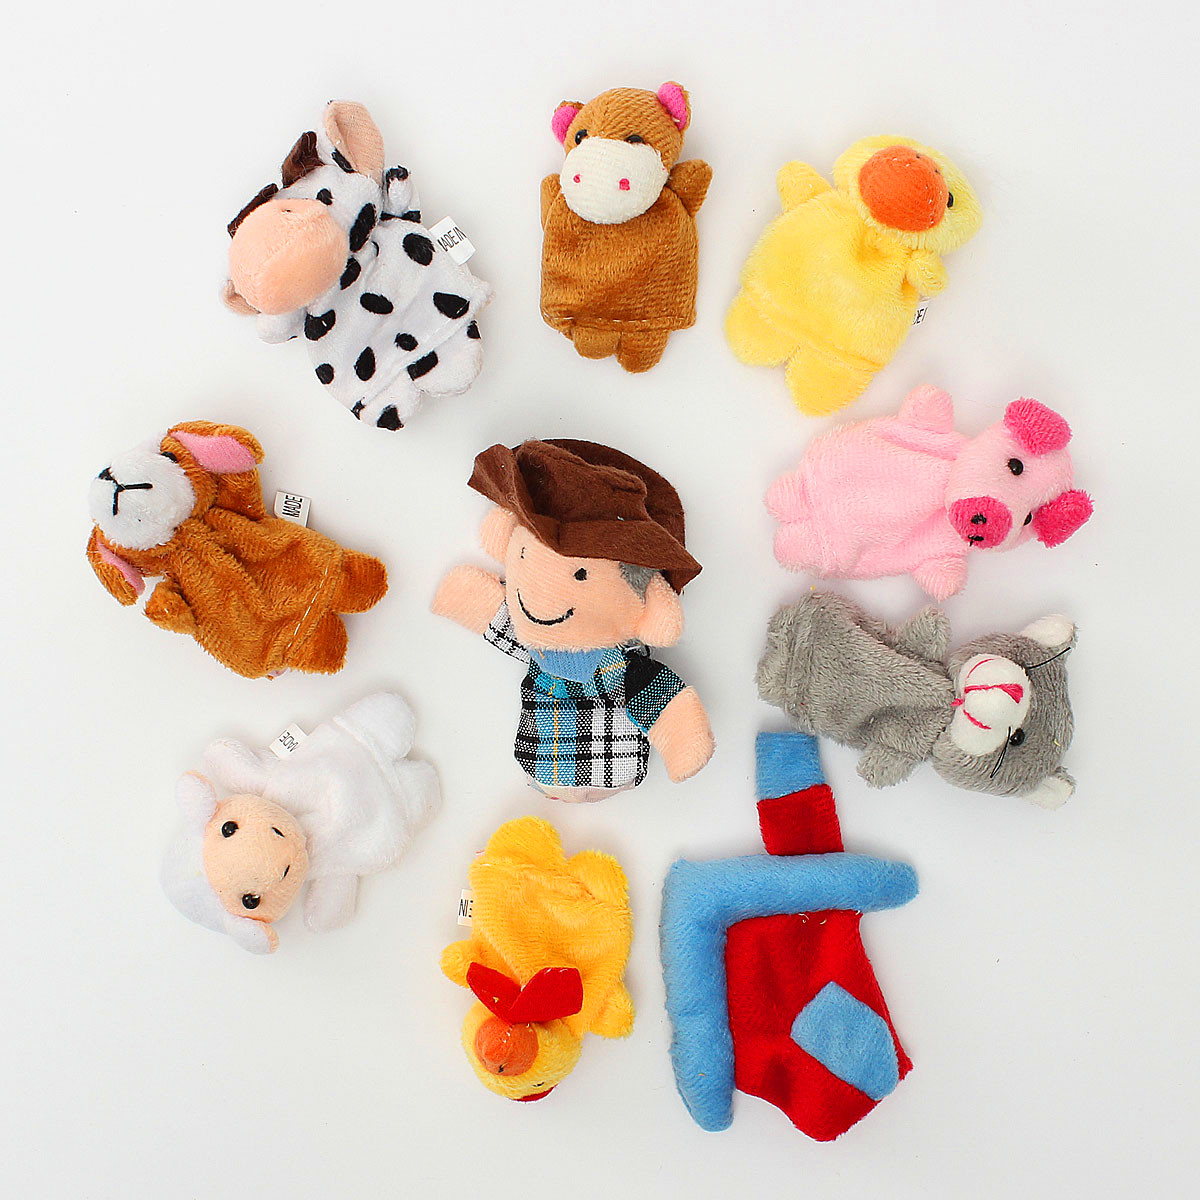 10-PCs-Family-Finger-Puppets-Cloth-Doll-Baby-Educational-Hand-Toy-965409